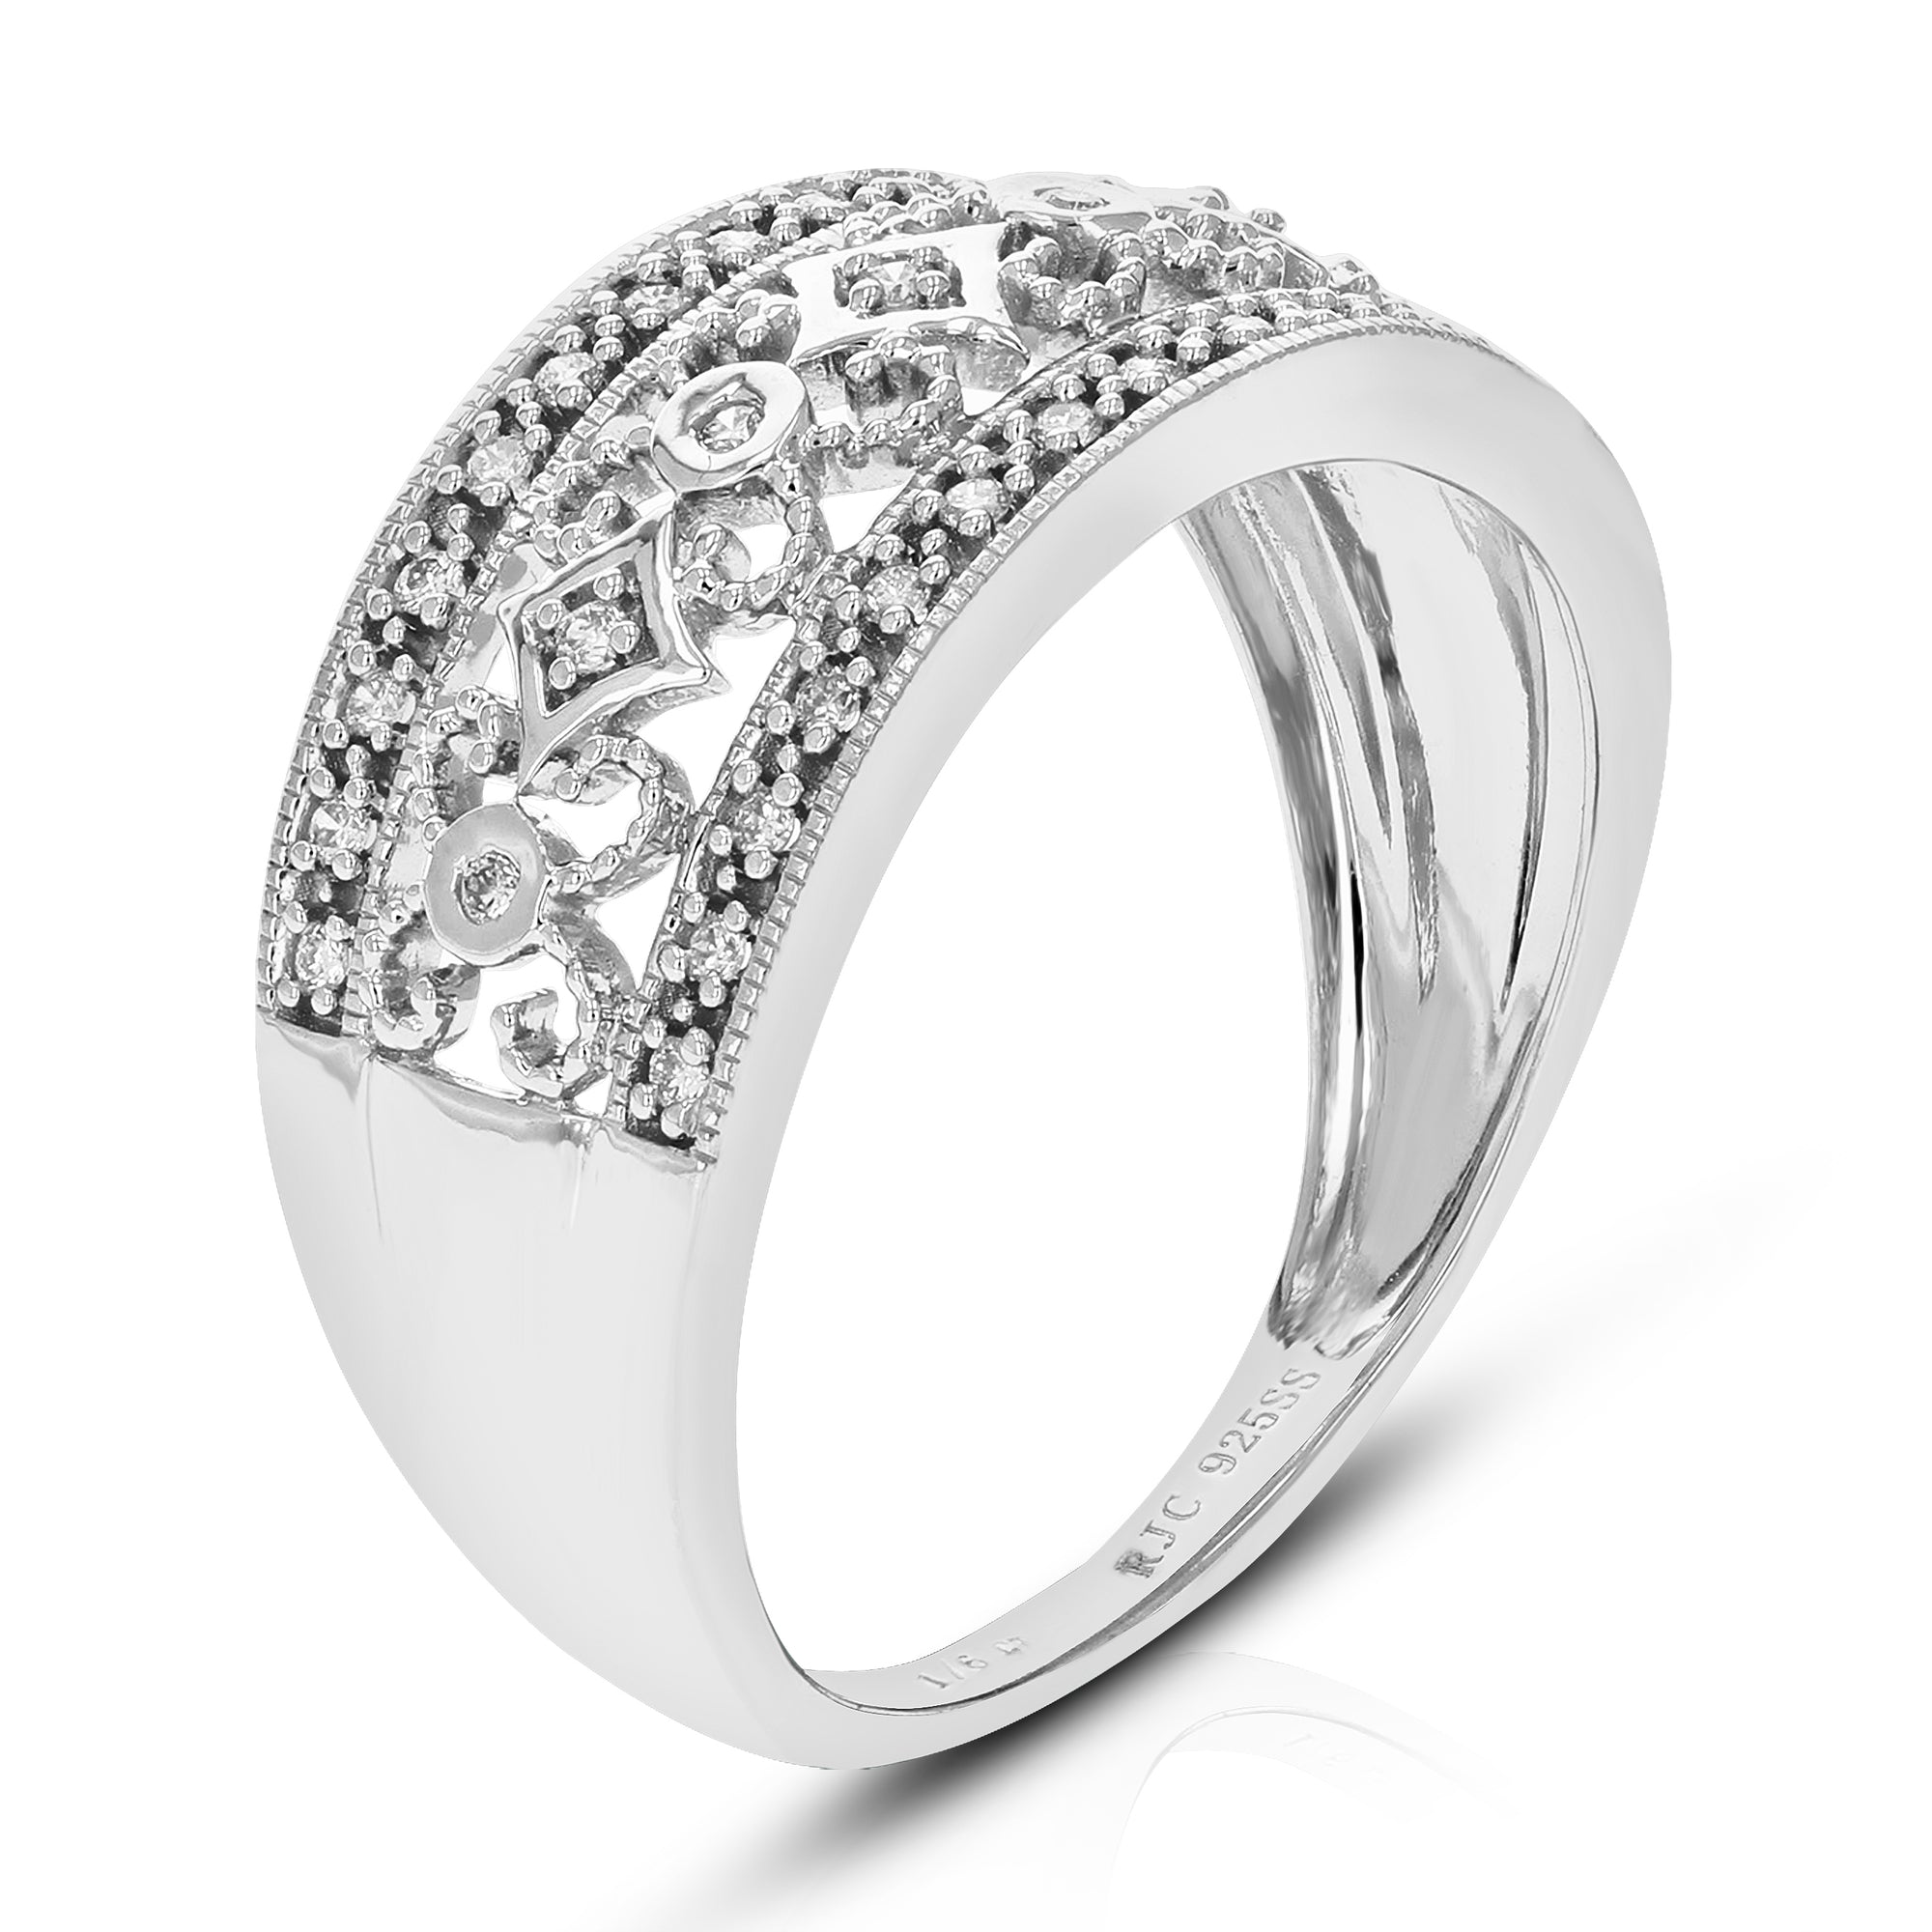 1/6 cttw Round Cut Lab Grown Diamond Wedding Band 35 Stones .925 Sterling Silver Prong Set